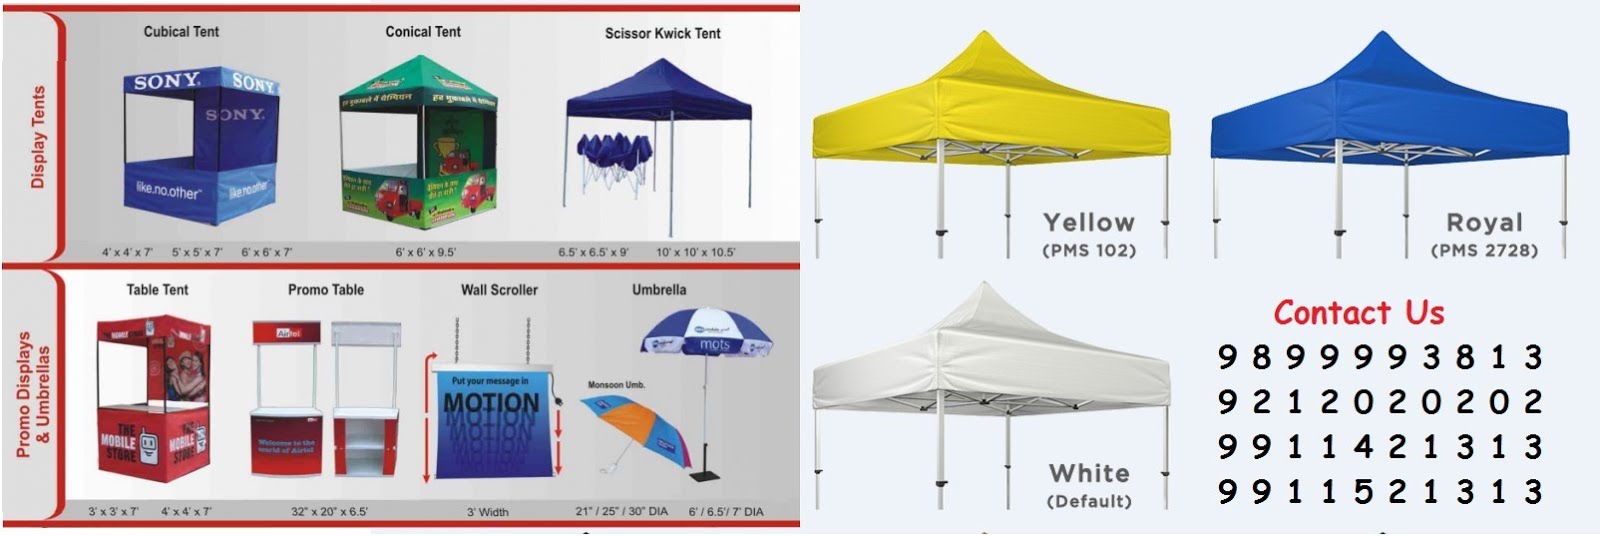 Manufacturers of Display Canopy Tents in New Delhi, Supply All Over India